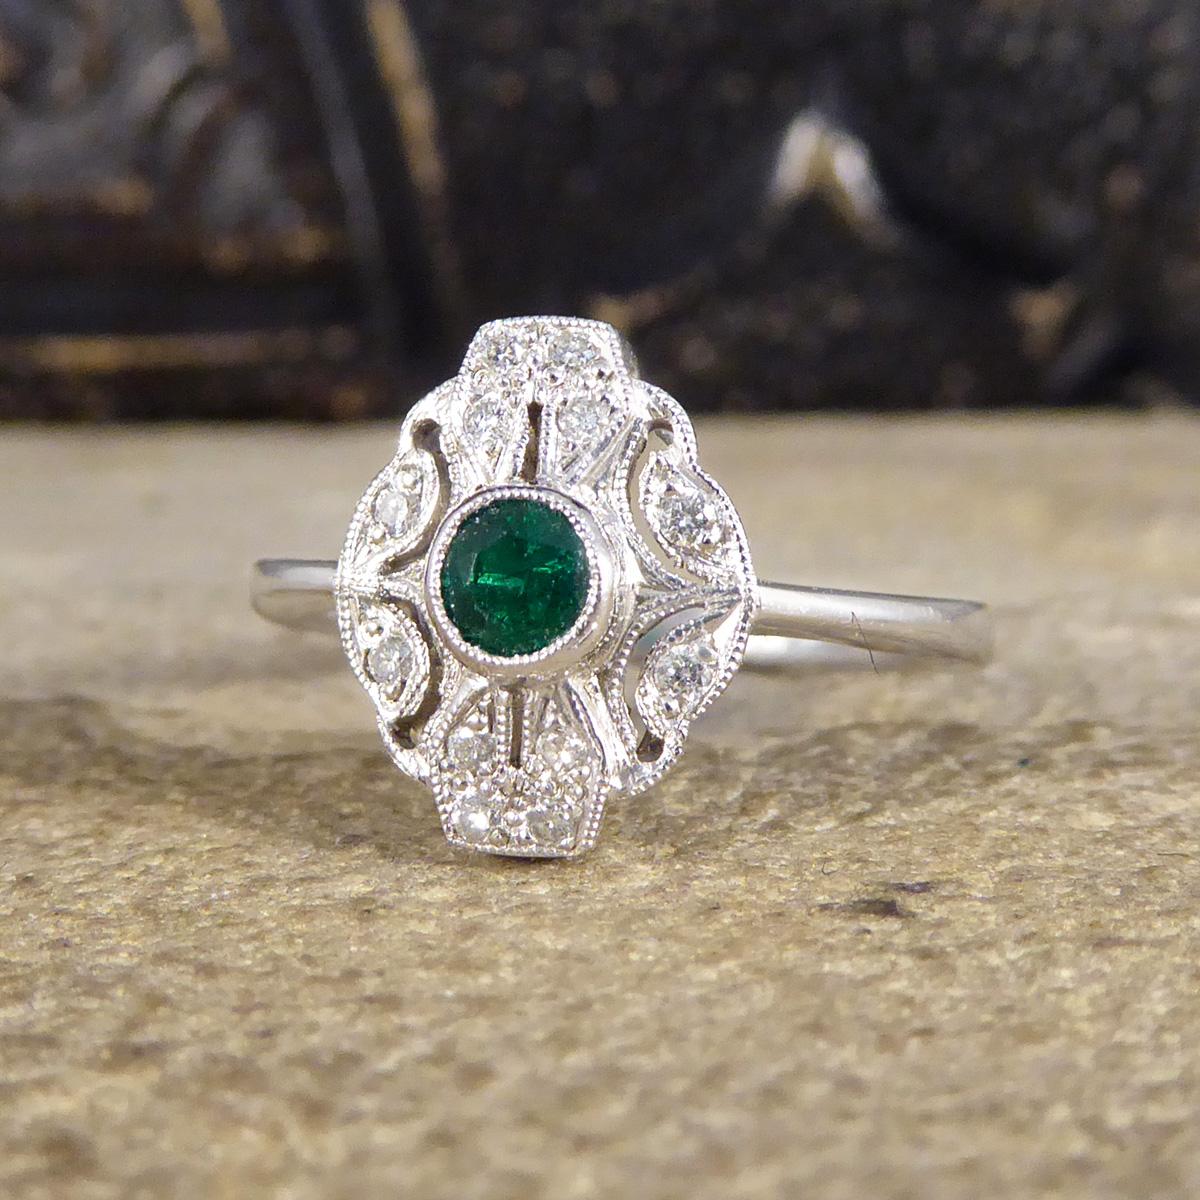 Premium Period Art Deco Replica Emerald and Diamond Ring in 18ct White Gold In New Condition For Sale In Yorkshire, West Yorkshire